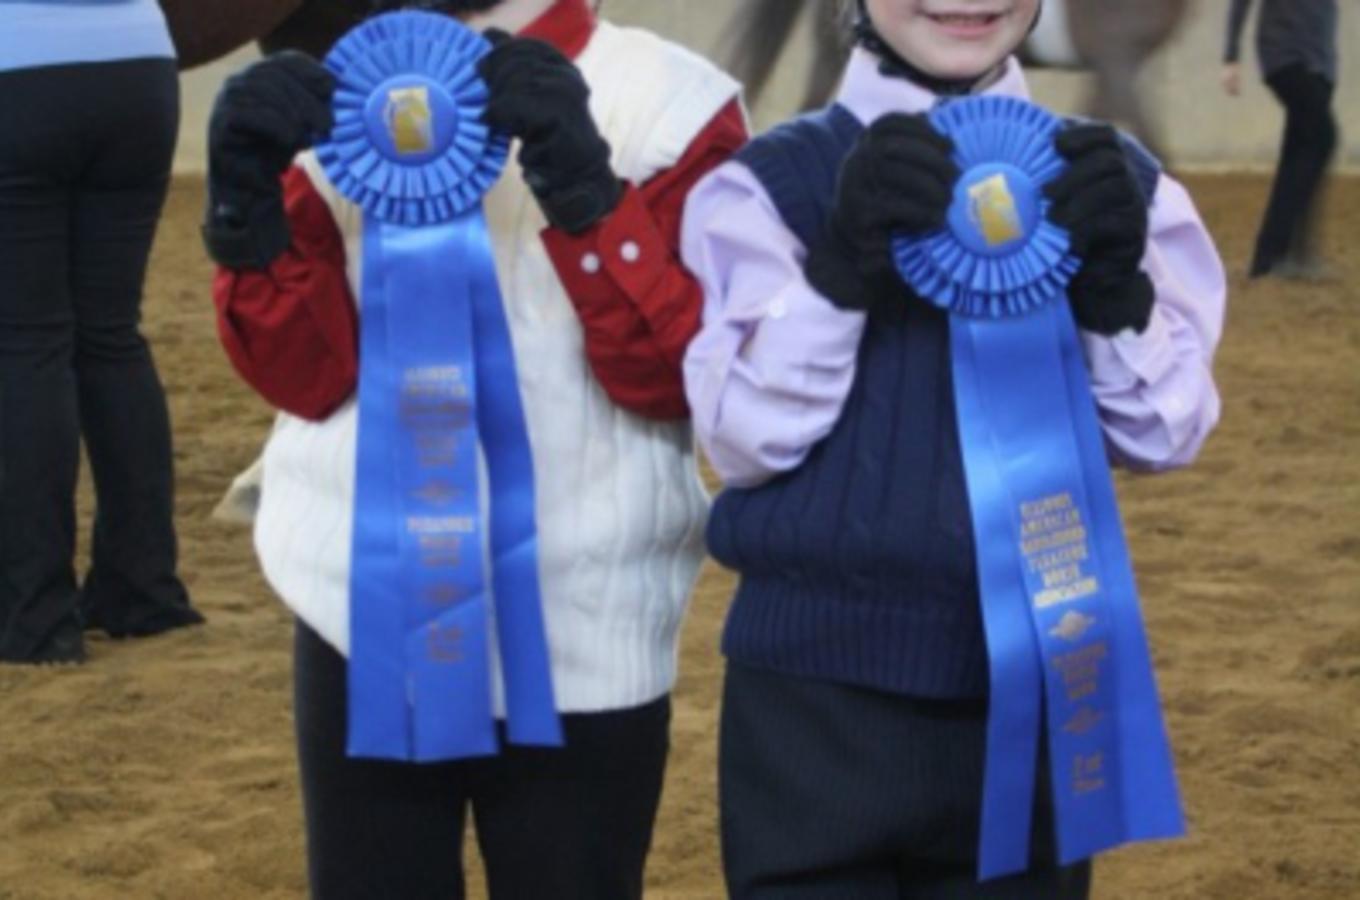 Applewood Farm Two Girls With Blue Ribbons